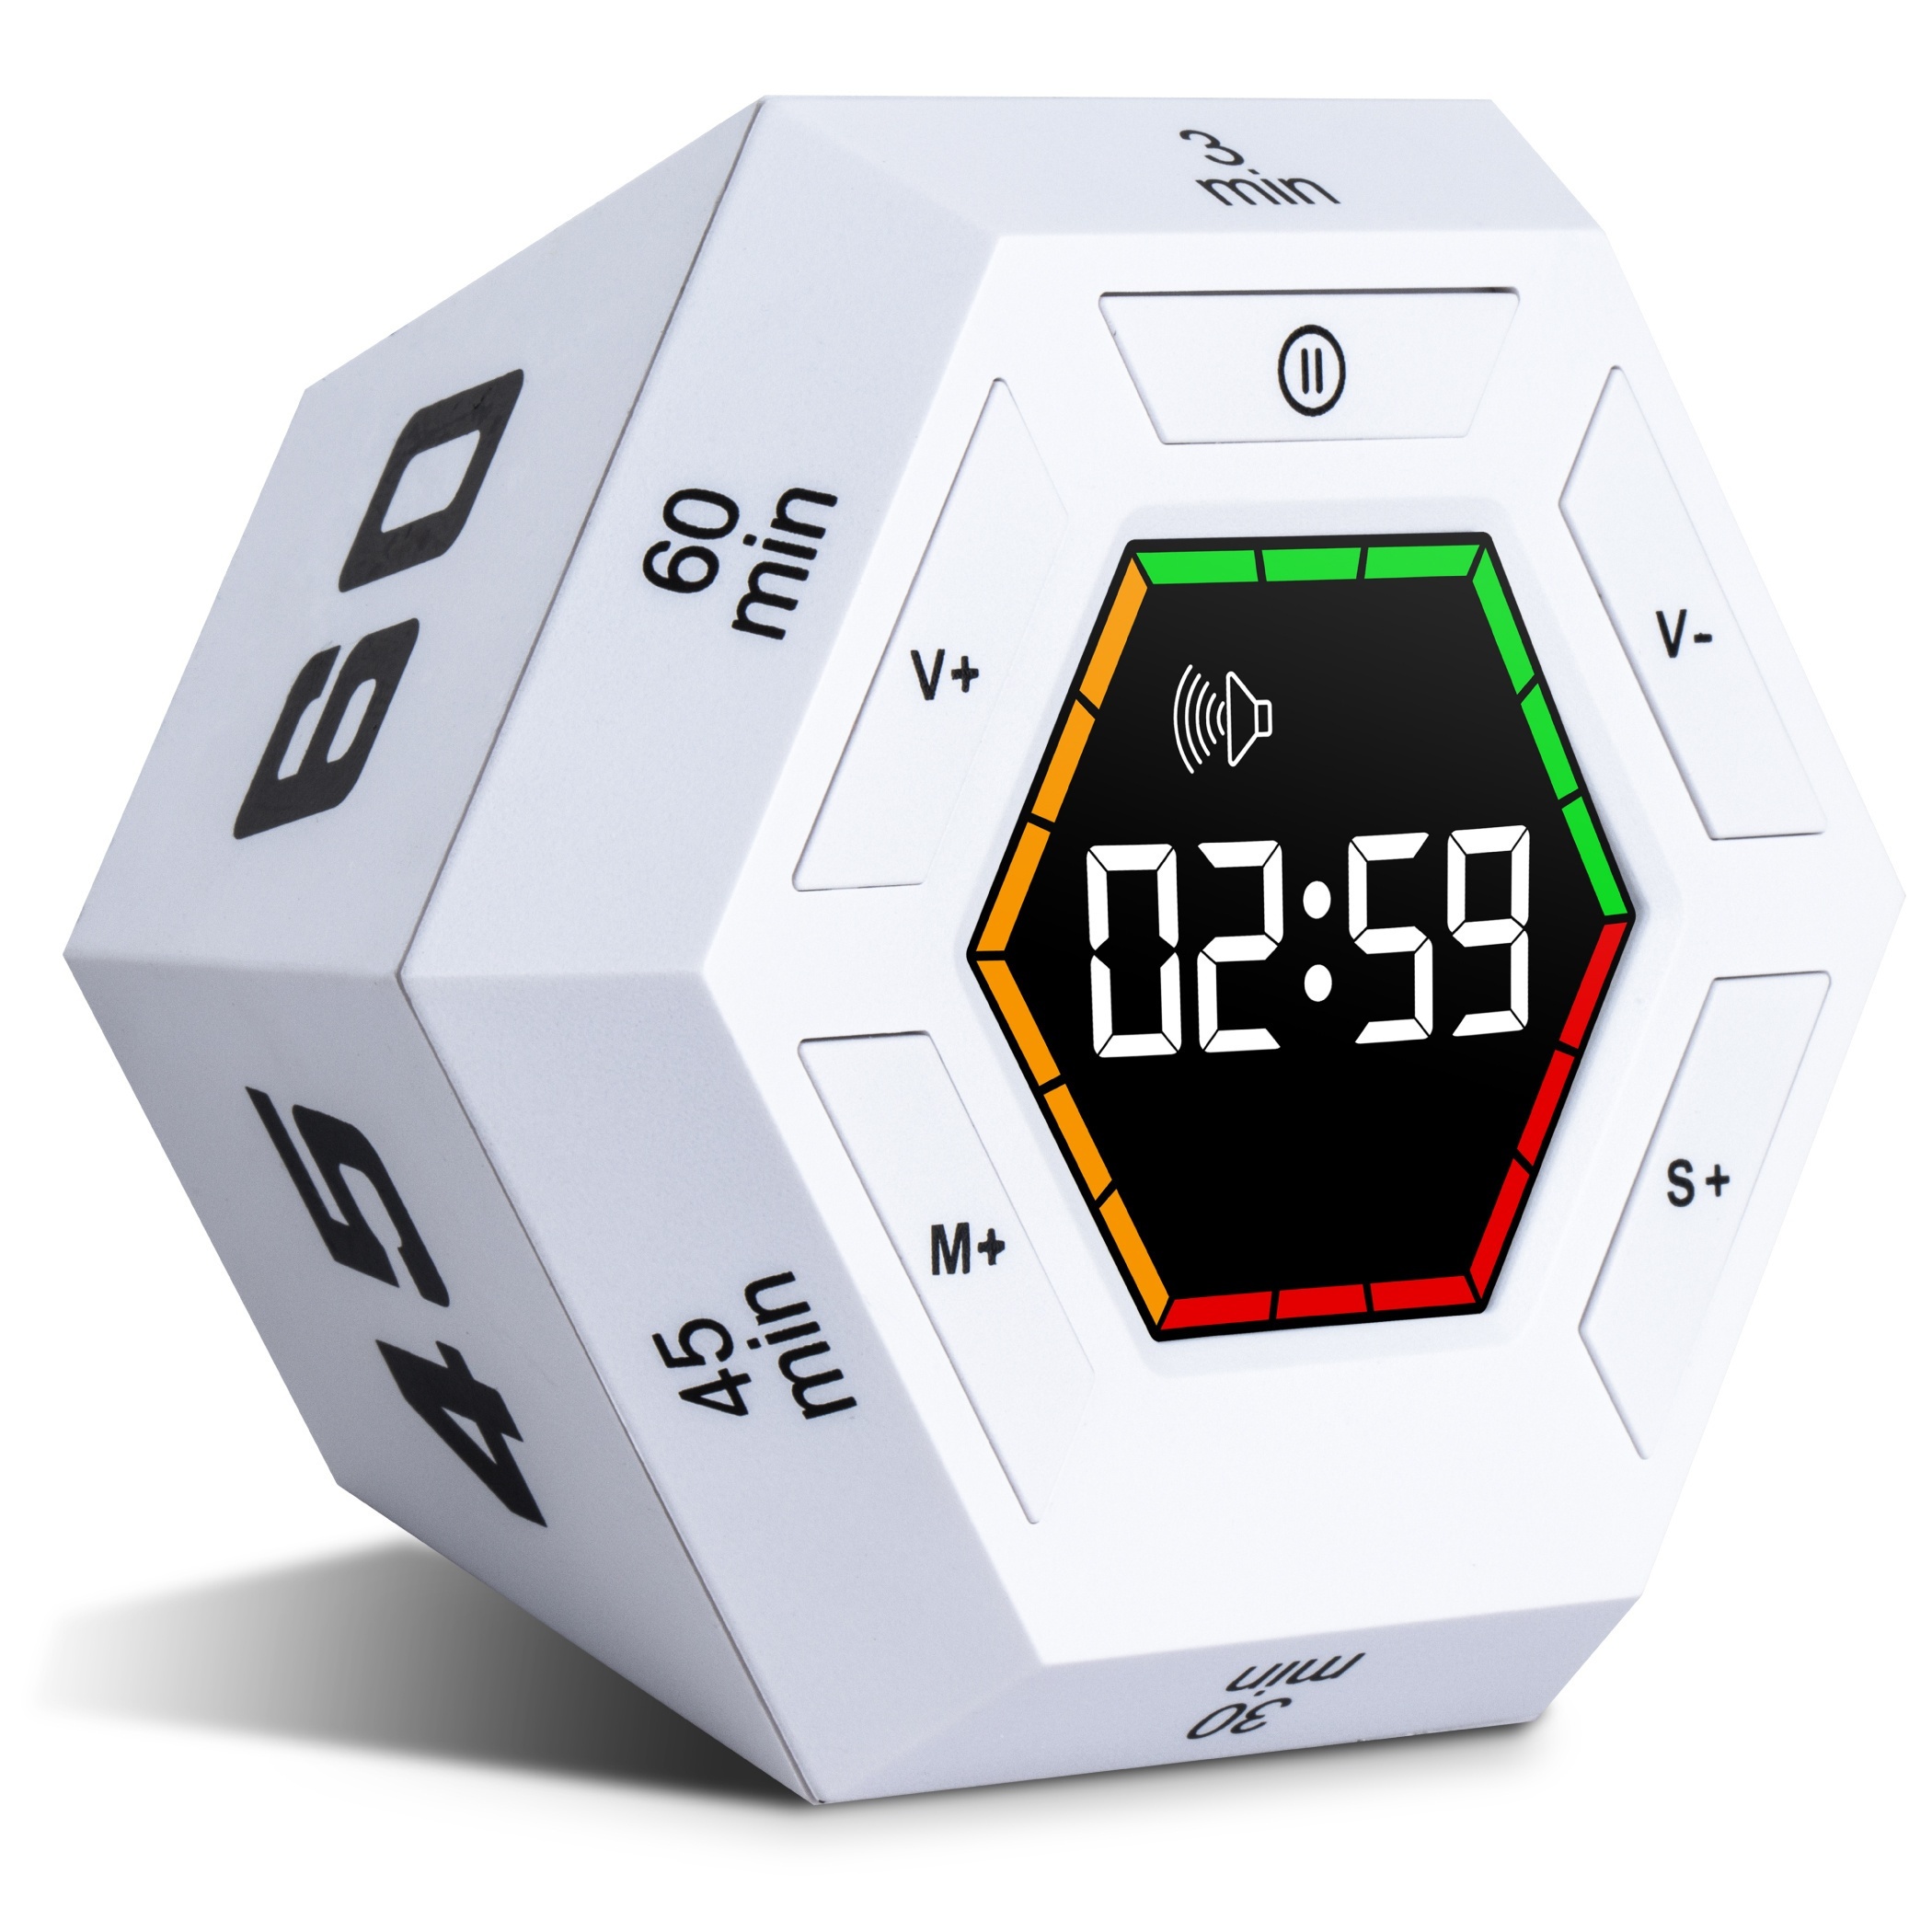 Magnetic Visual Timer with Flip Countdown